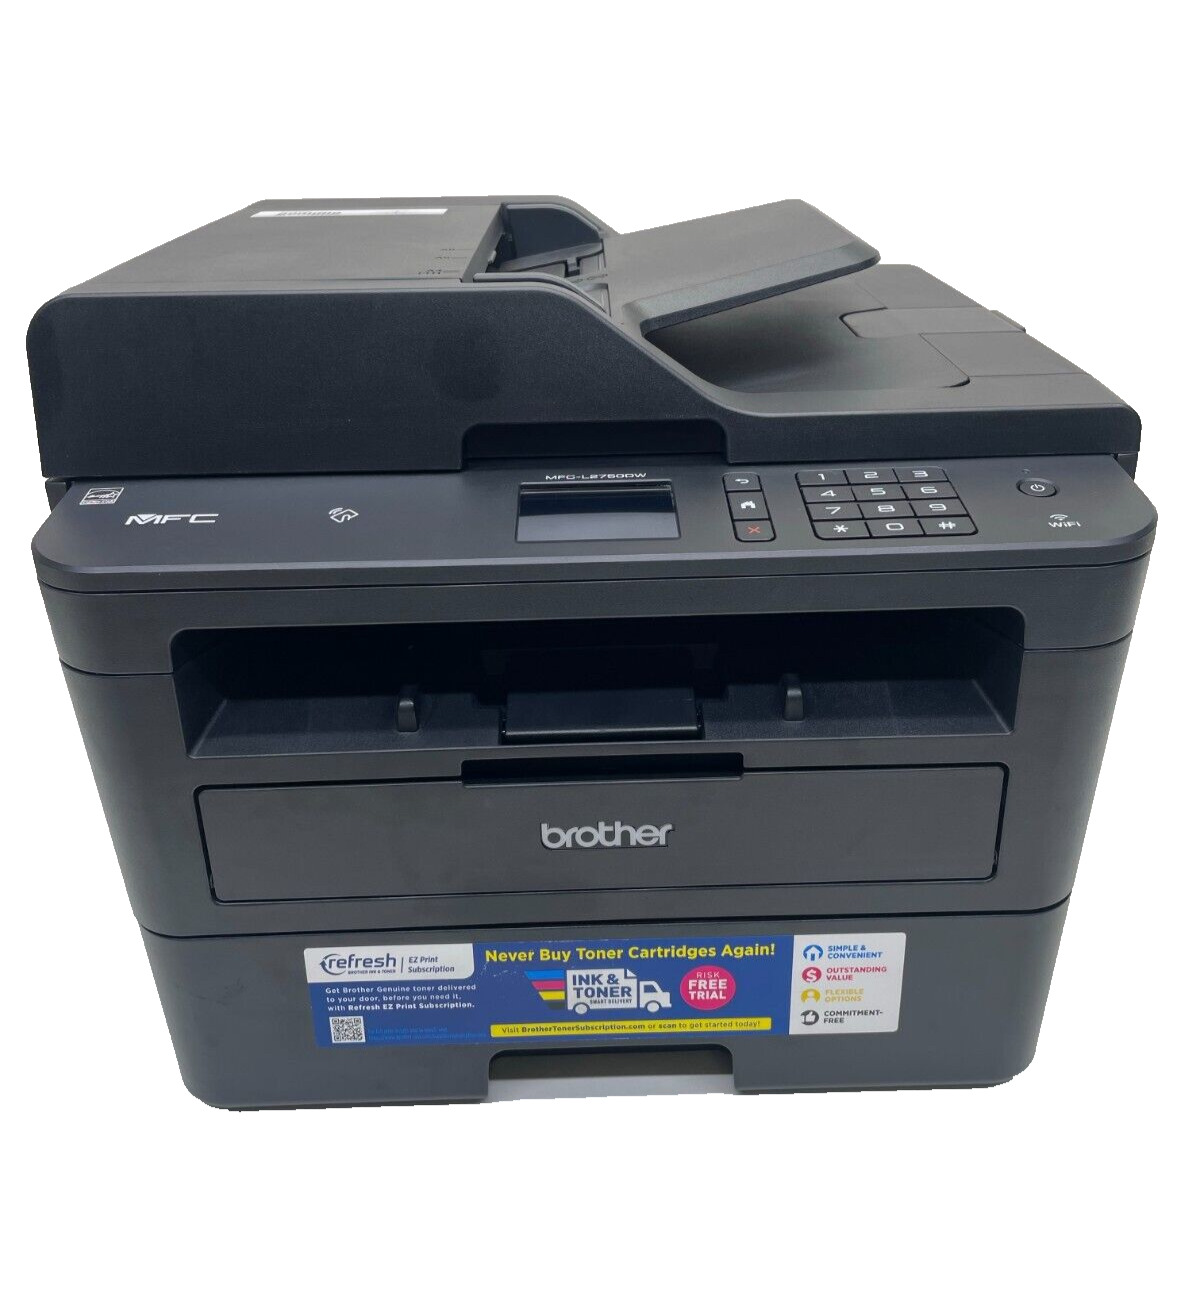 Brother MFC-L2750DW AIO Laser Printer PAGE COUNT 155 /Toner 85% Full,  Drum 100%